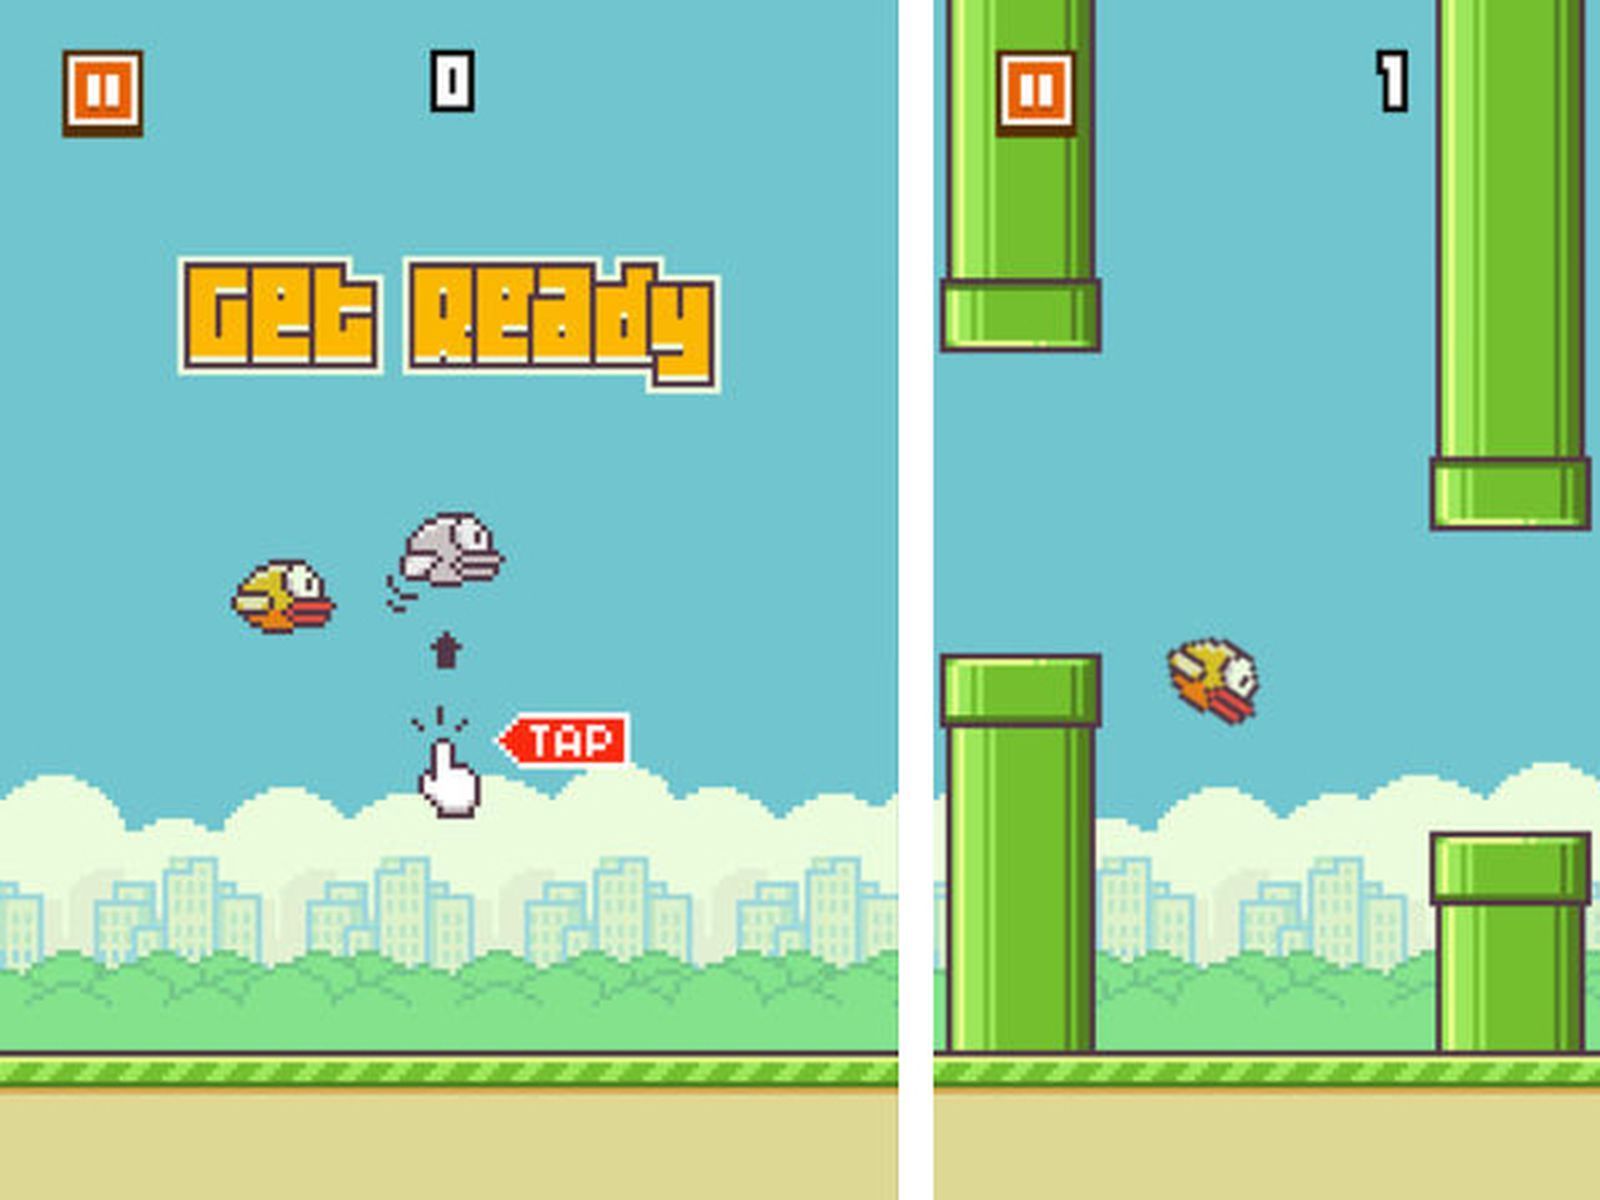 Flappy Bird Creator Reveals Why He Pulled the App, 'Considering